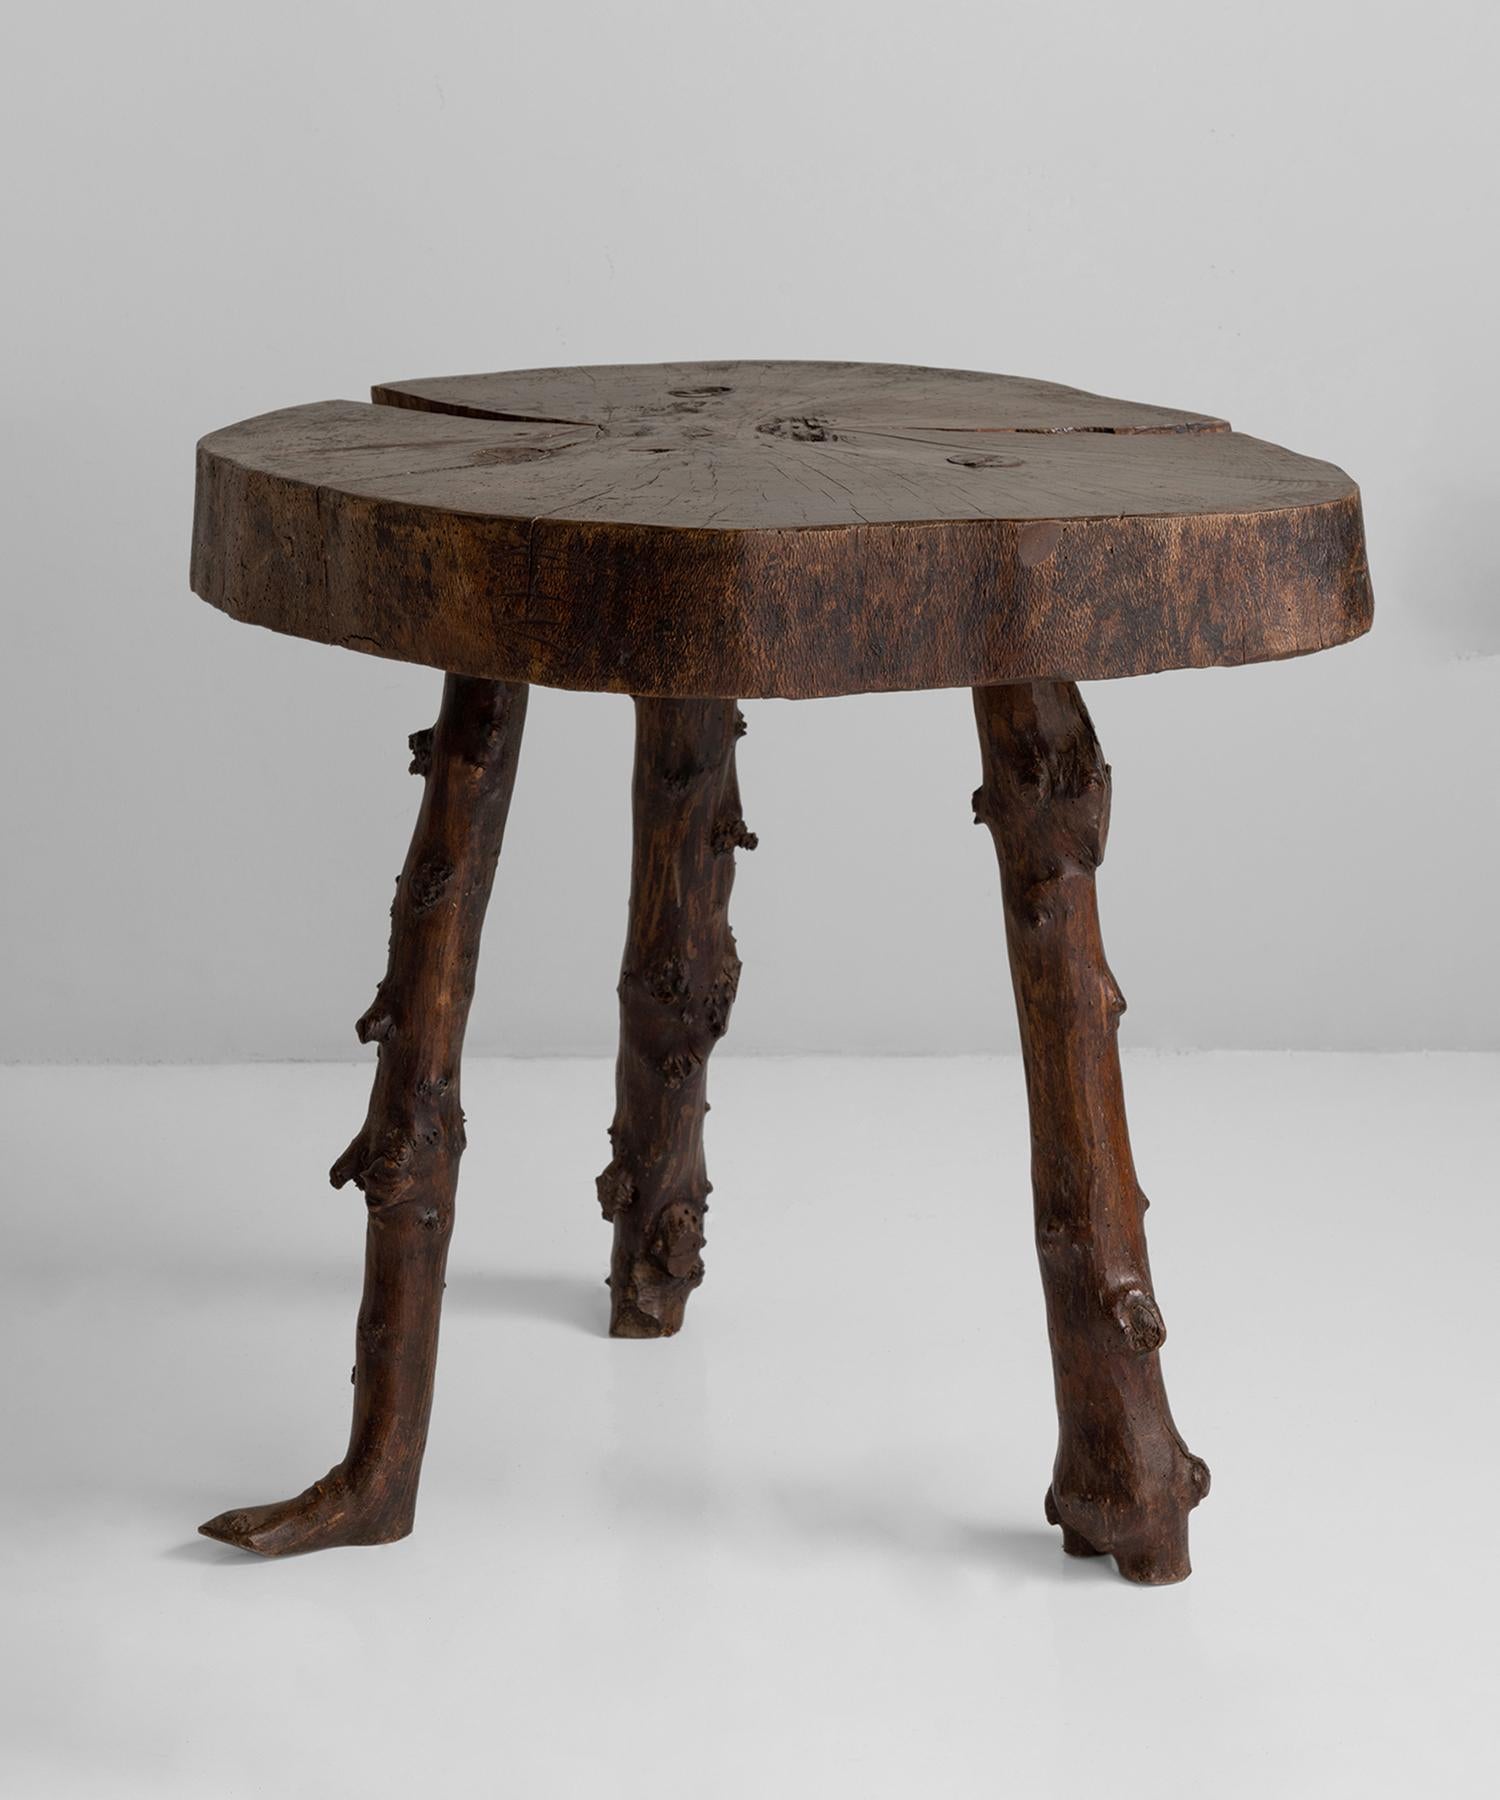 French Primitive Wooden Slab Table, France, 19th Century